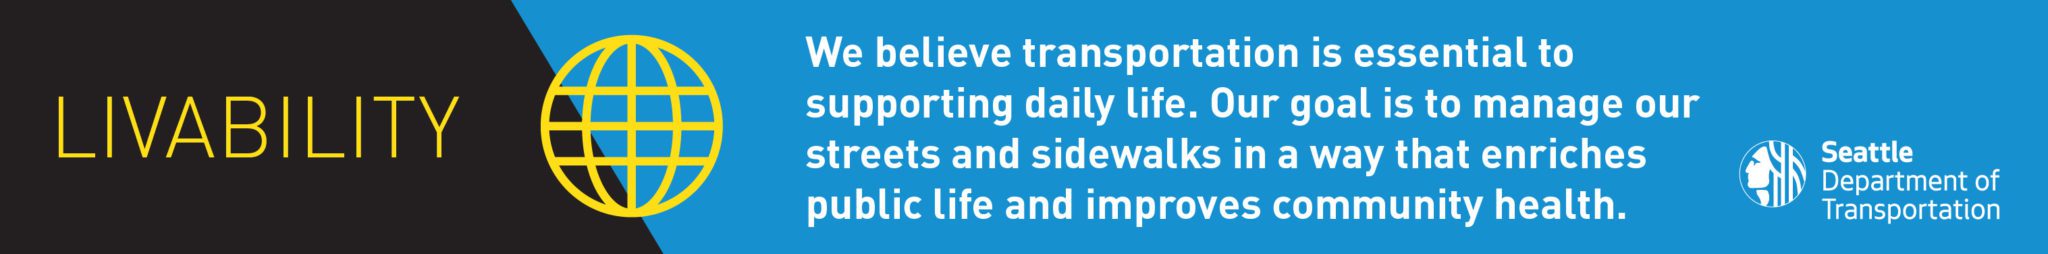 We believe transportation is essential to supporting daily life. Our goal is to manage our streets and sidewalks in a way that enriches public life and improves community health.